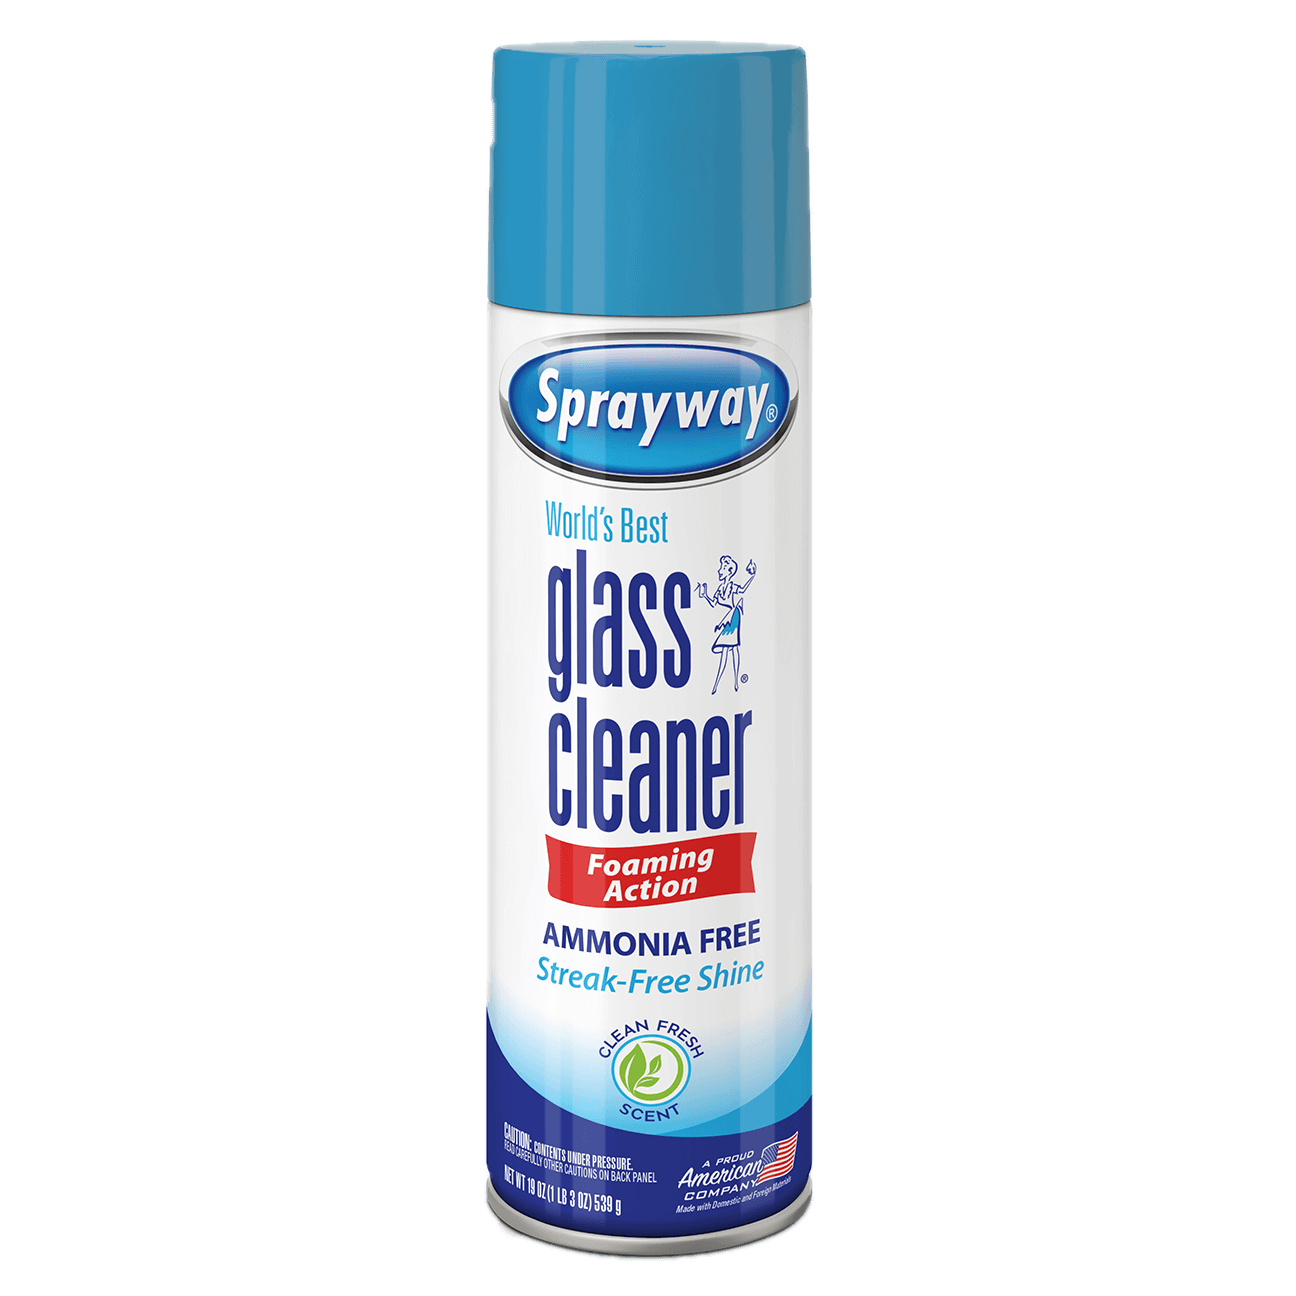 Sprayway World's Best Glass Cleaner Foaming Action 19 oz